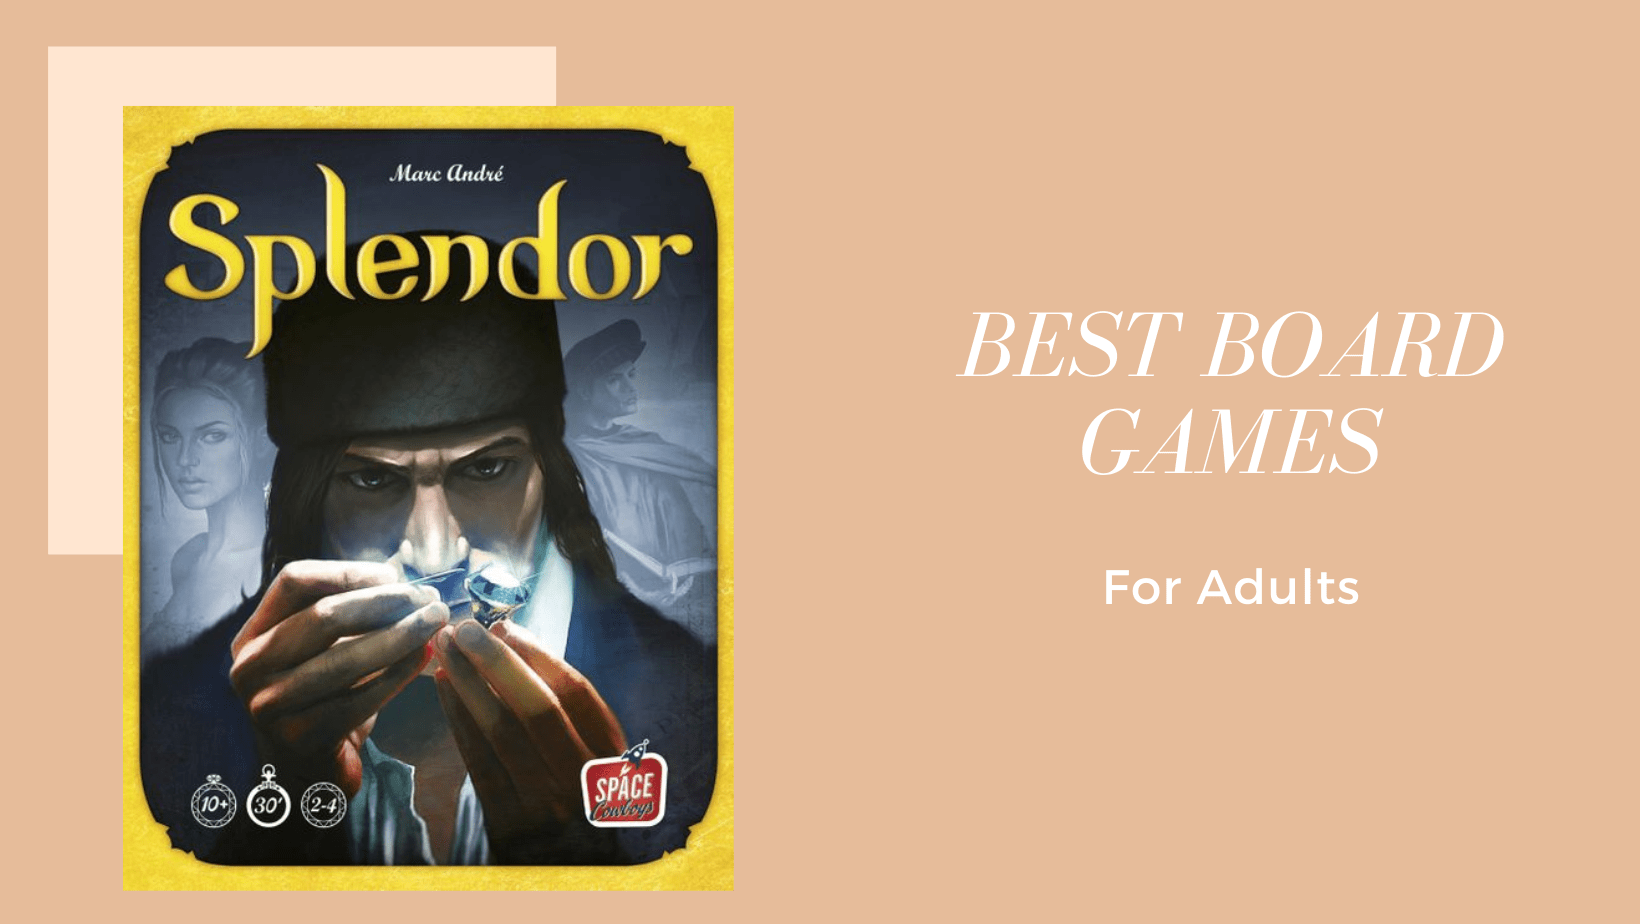 The board game Splendor as one of the best board games for adults.